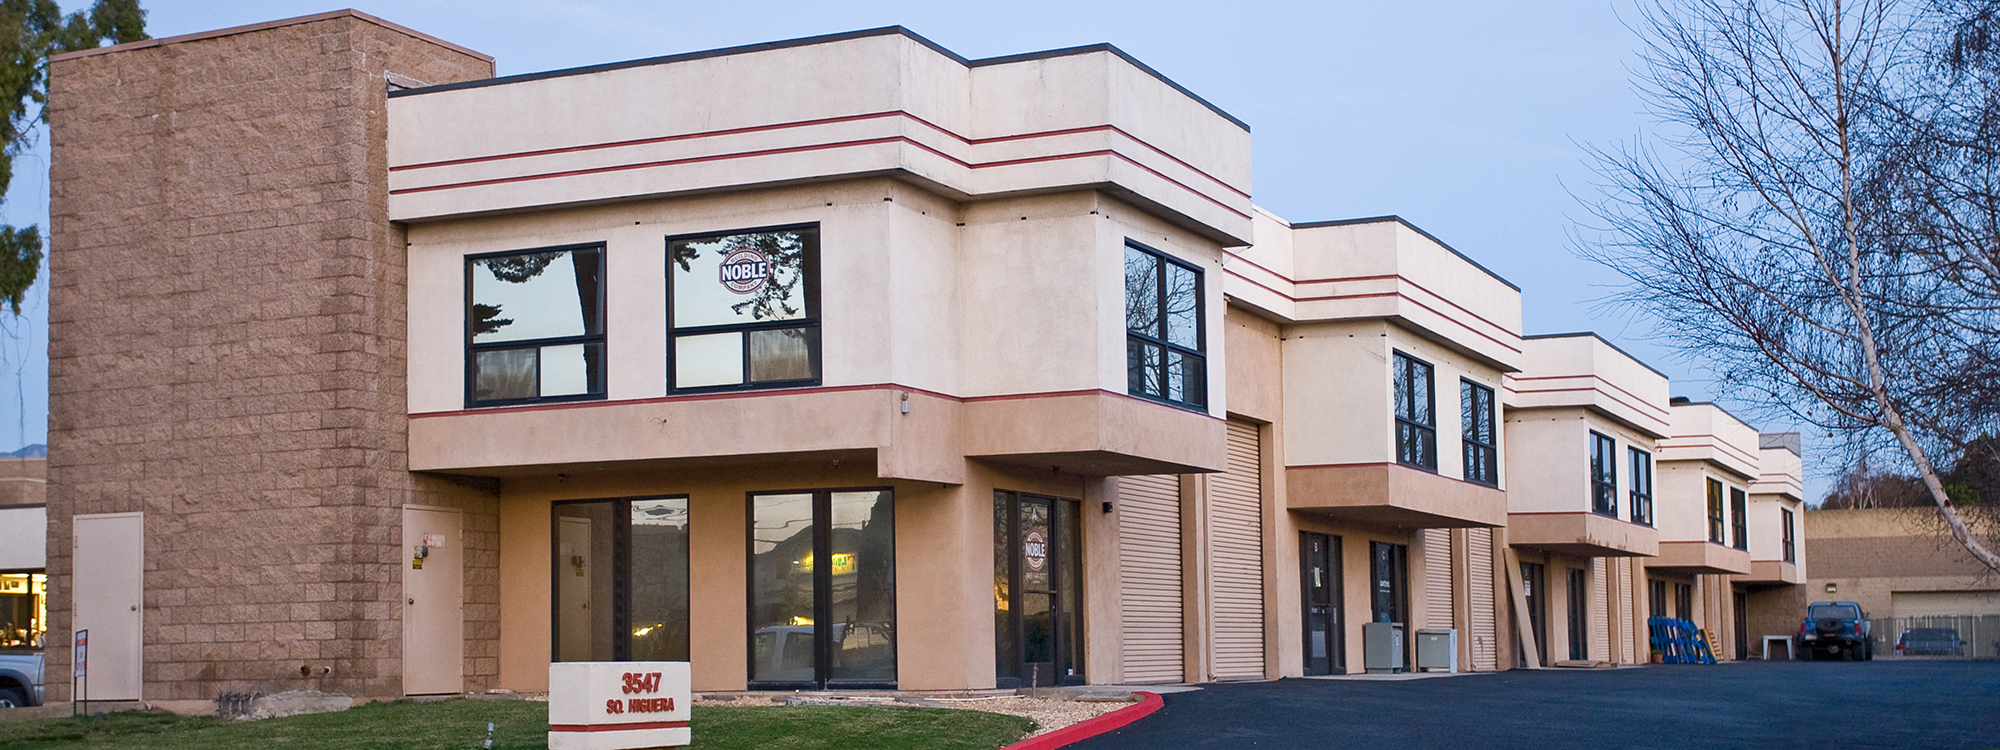 Masonry and Brick Commercial Offices San Luis Obispo Contractor - Professional Office building builder - JW Design & Construction